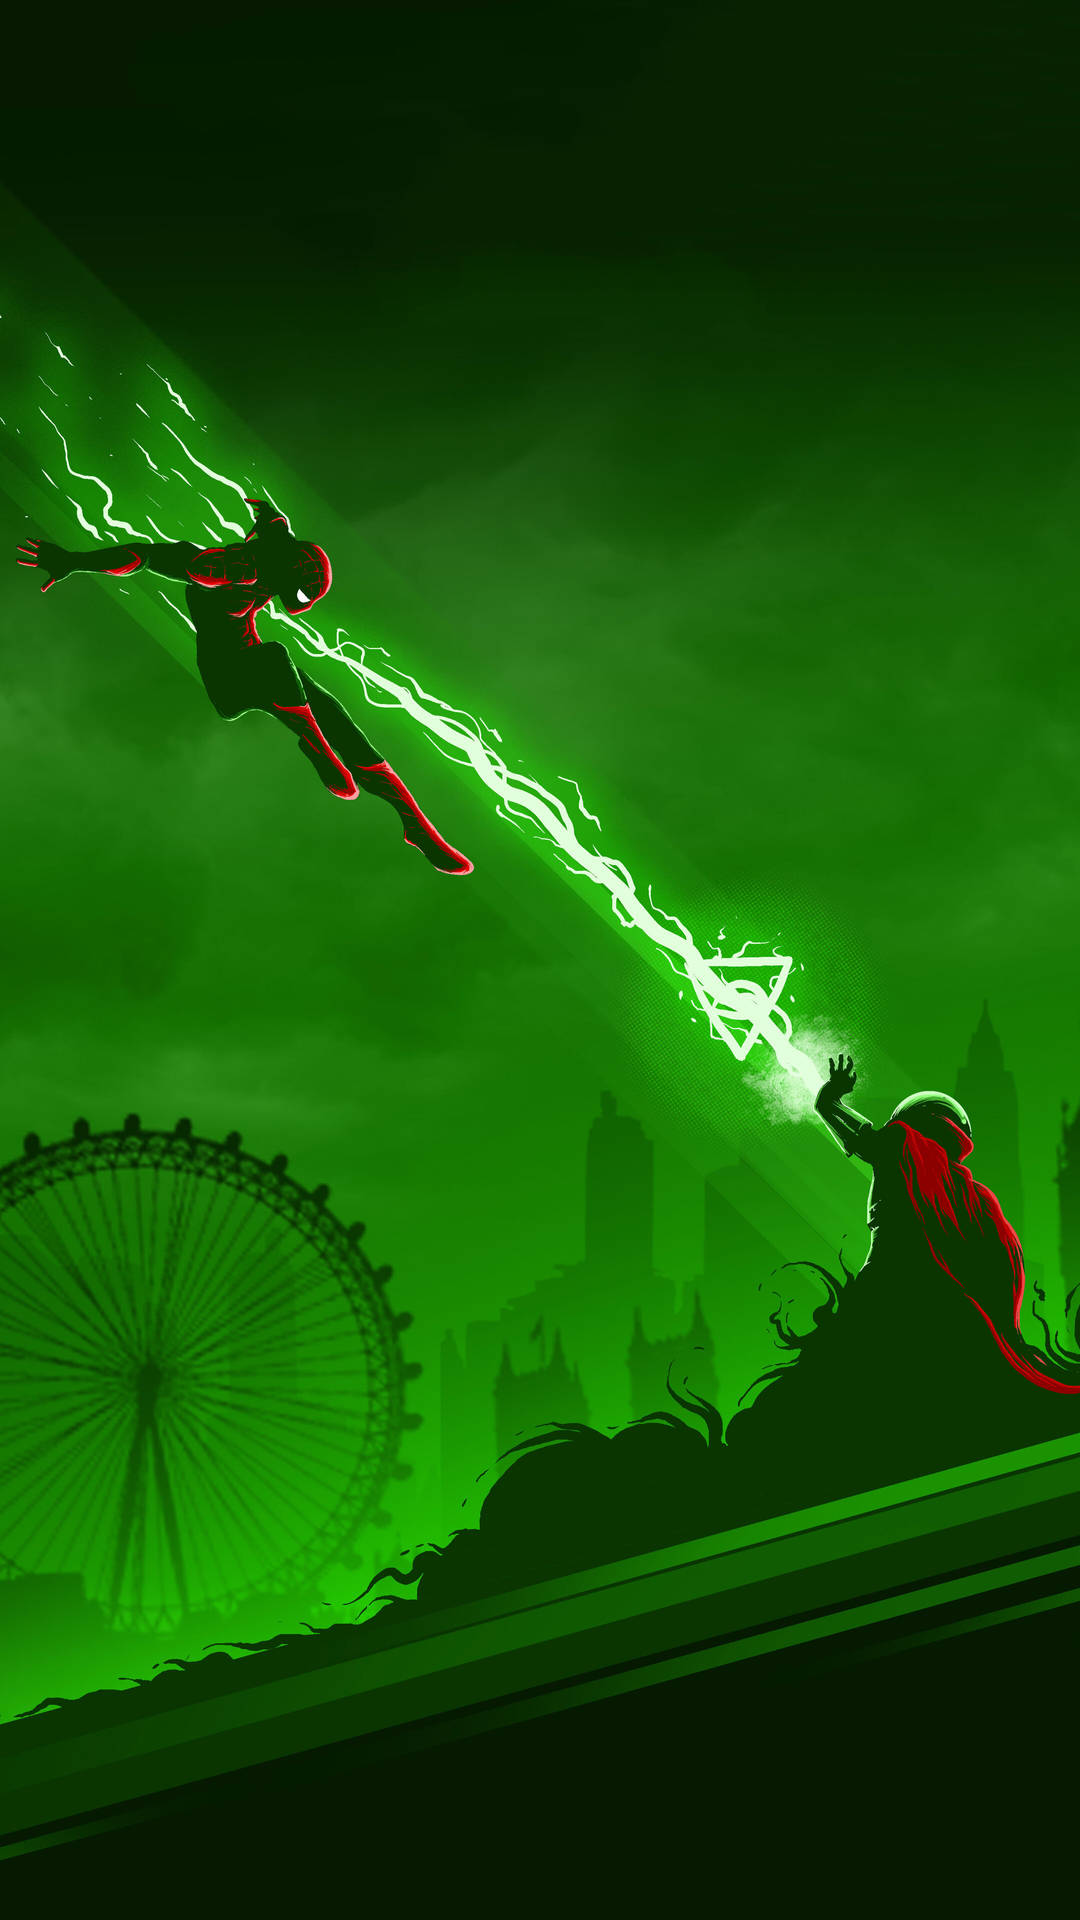 Mysterio And Spider-Man Fighting Wallpaper